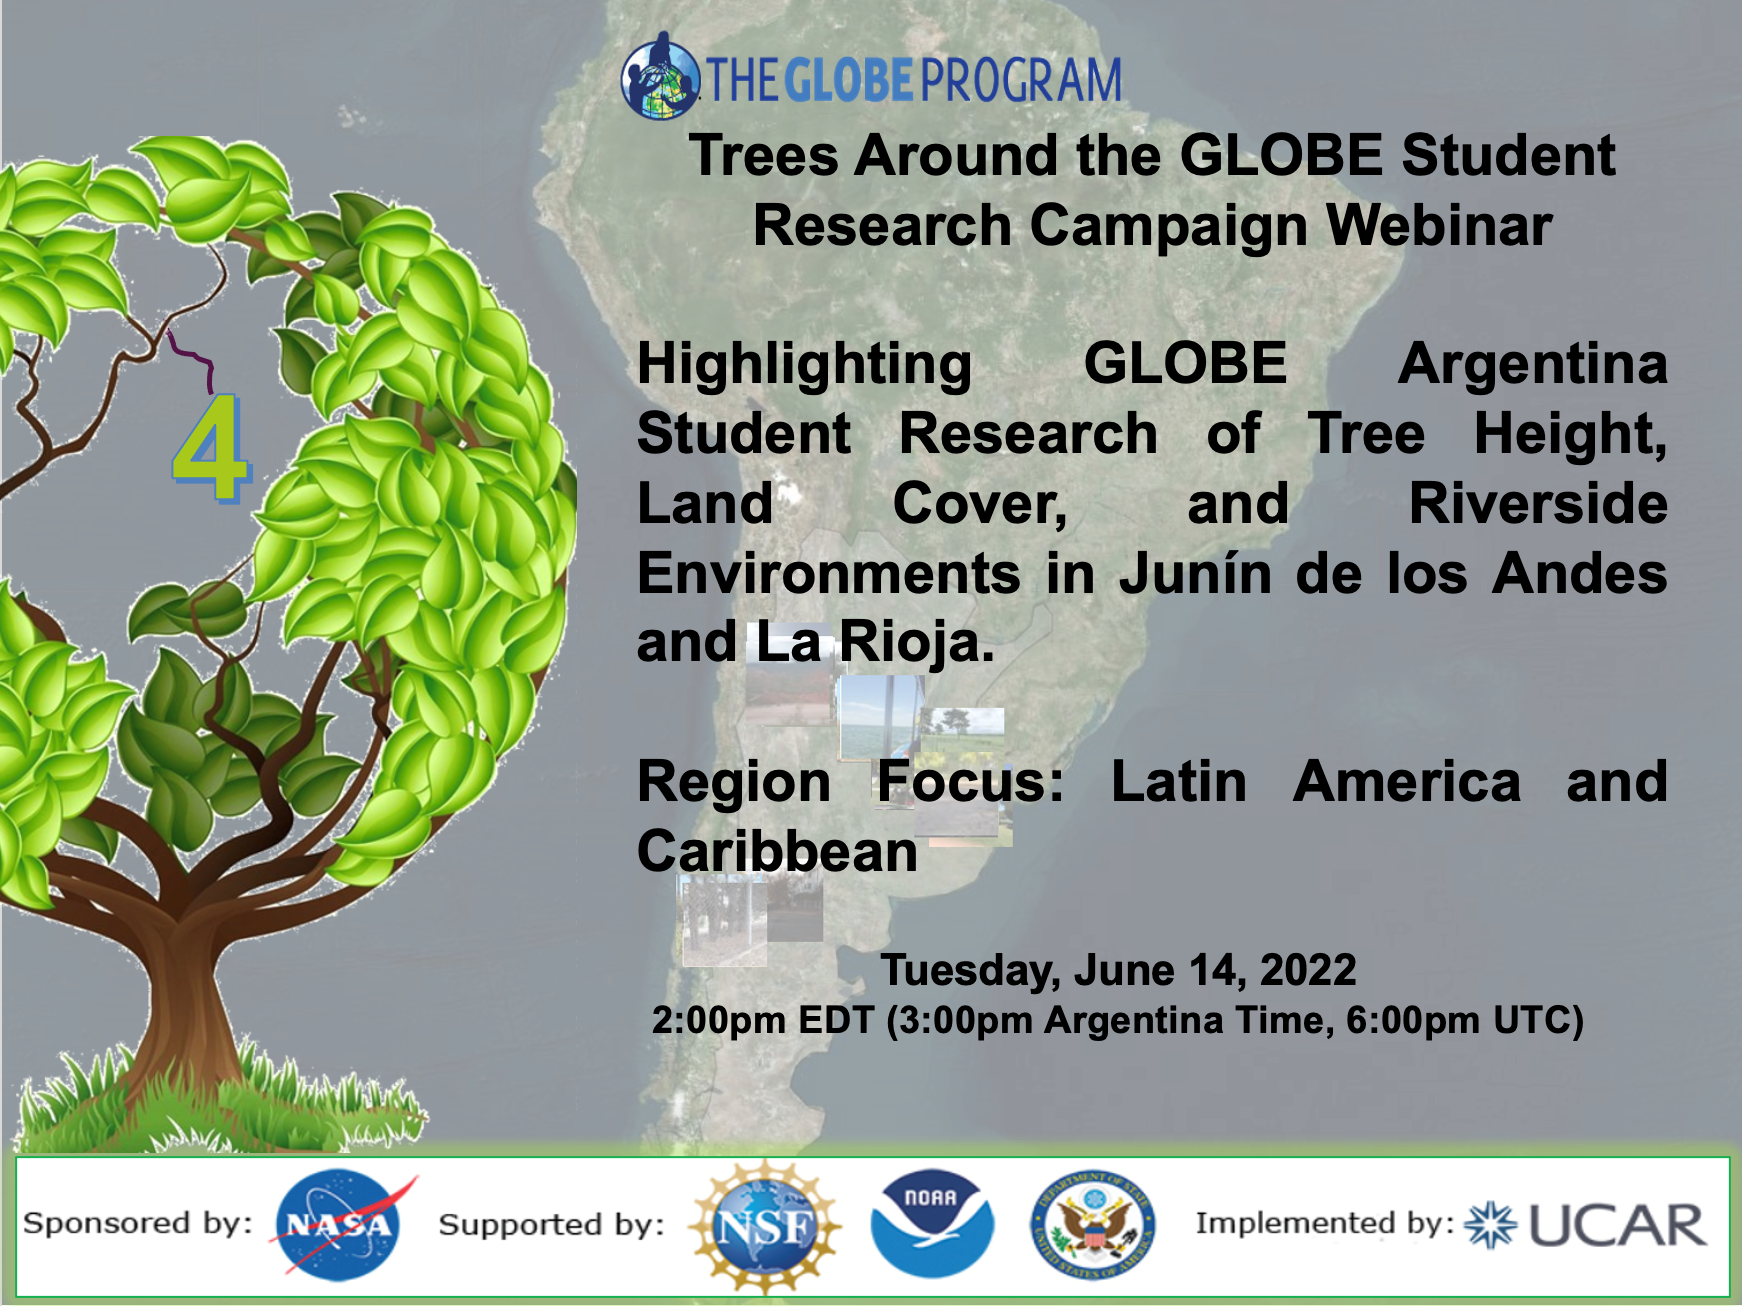 Trees Around the GLOBE 14 June webinar shareable, with the title of the webinar